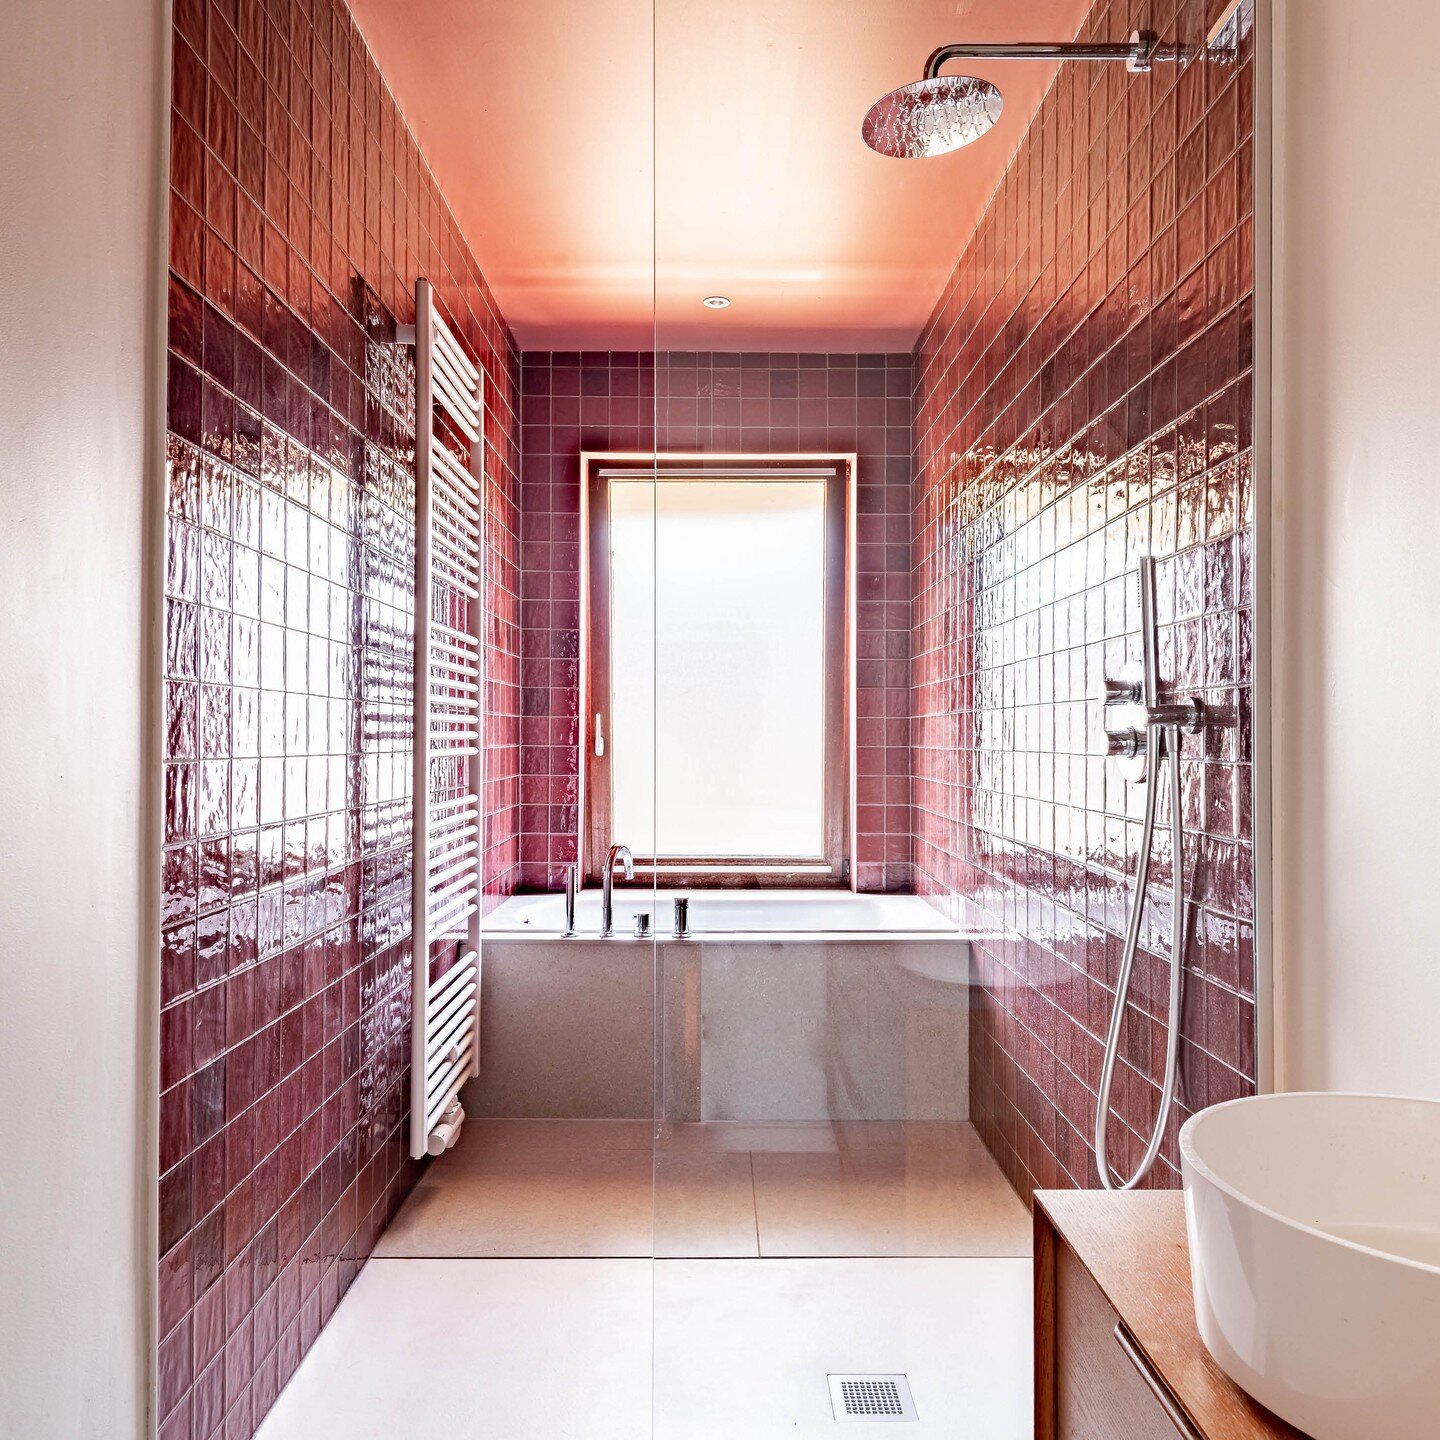 &lsquo;The Wetroom&rsquo; - Enjoying both a bath and a shower without compromising on natural light and space in just 6.3m&sup2; is a bliss. 
By making slight layout adjustments, this design challenge resulted in a unique and personalized solution.
S